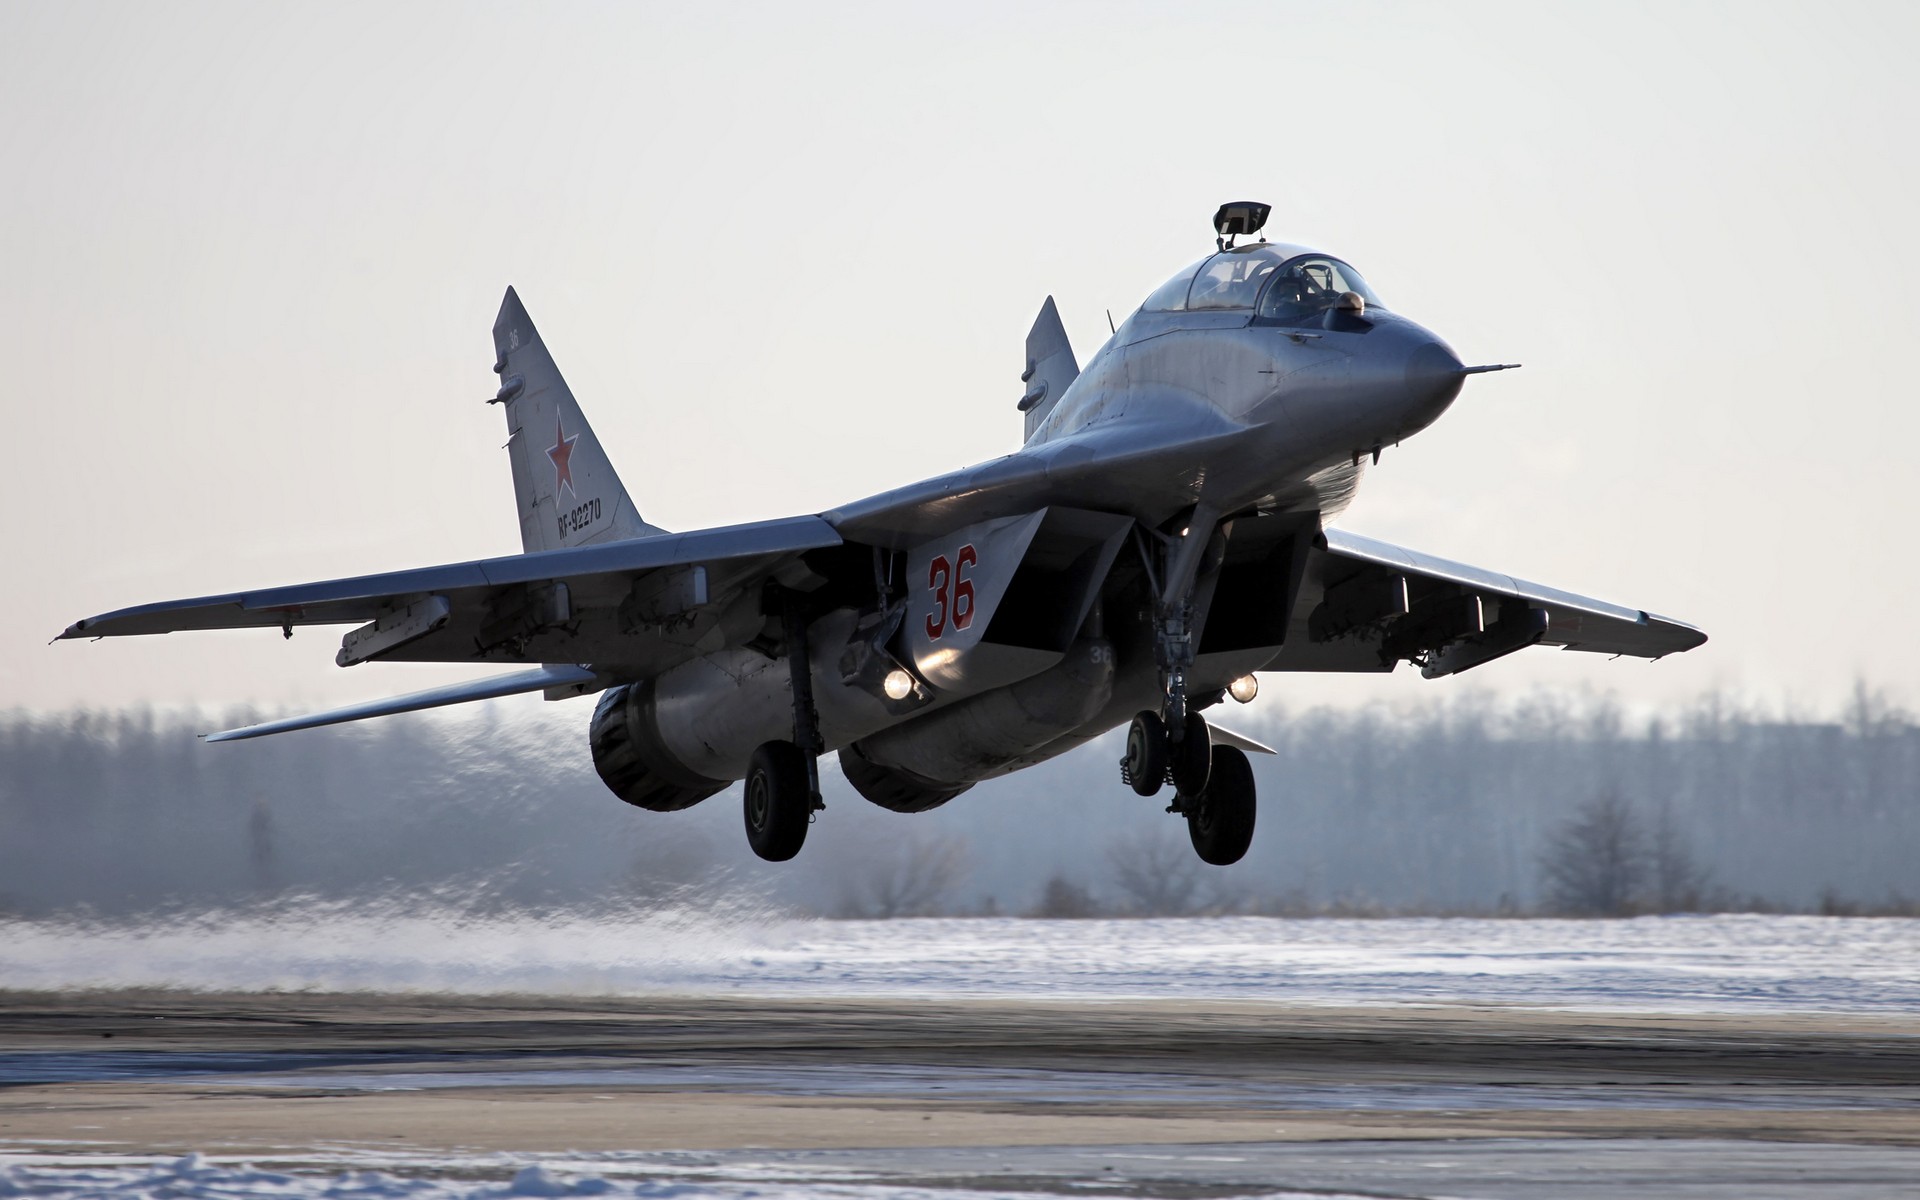 General 1920x1200 aircraft military airplane Mikoyan MiG-29 Russian Air Force jet fighter vehicle military vehicle take-off Mikoyan-Gurevich Russian/Soviet aircraft